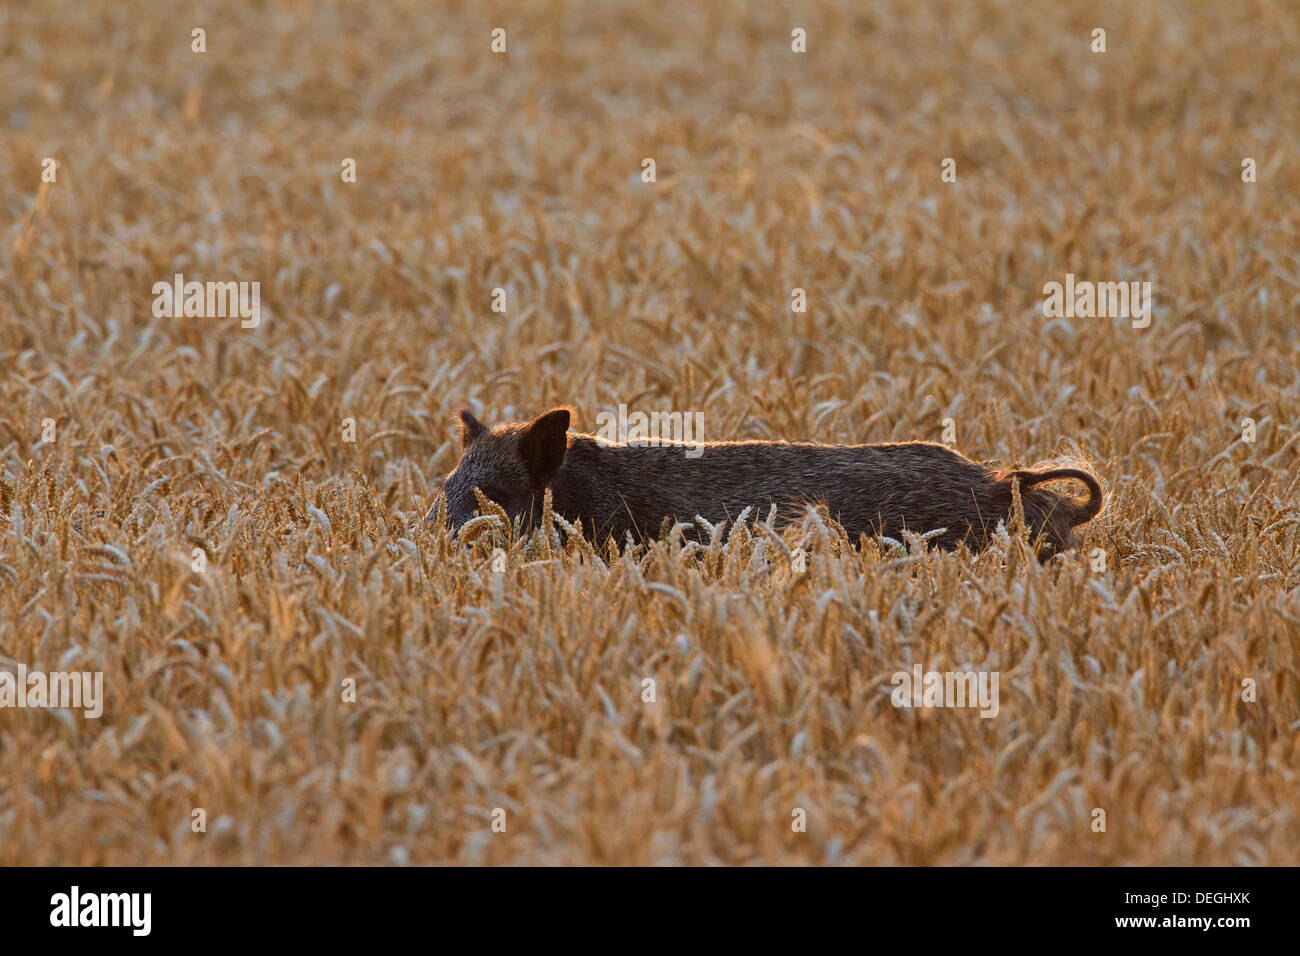 Nuisance by wild boar (Sus scrofa) trampling crop by foraging in cornfield on farmland at dusk Stock Photo